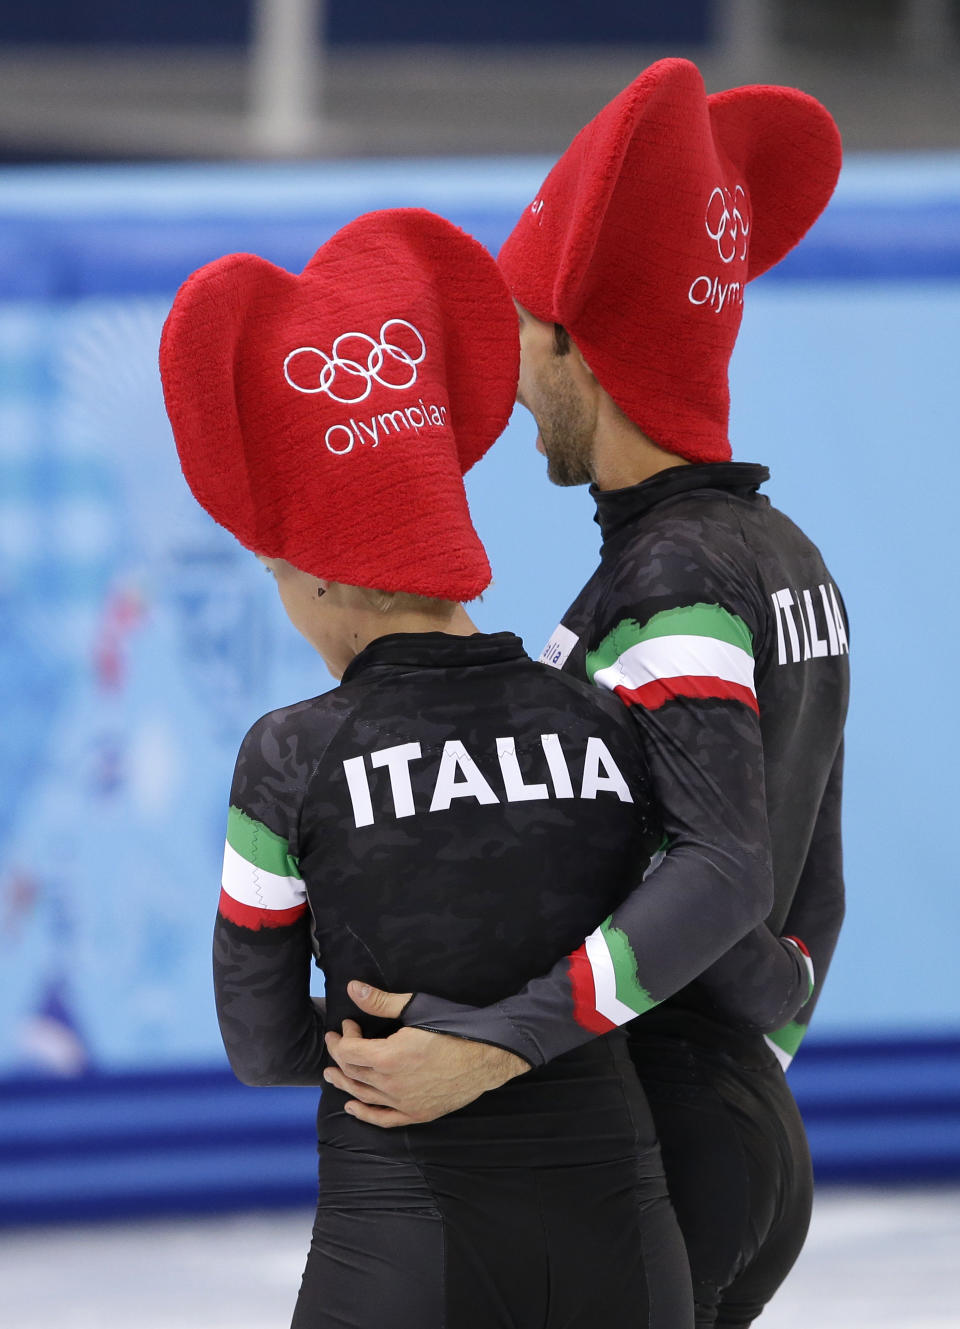 Arianna Fontana of Italy and Anthony Lobello of Italy wear Valentines Day themed hats during a short track speedskating practice session at the Iceberg Skating Palace during the 2014 Winter Olympics, Friday, Feb. 14, 2014, in Sochi, Russia. (AP Photo/Darron Cummings)